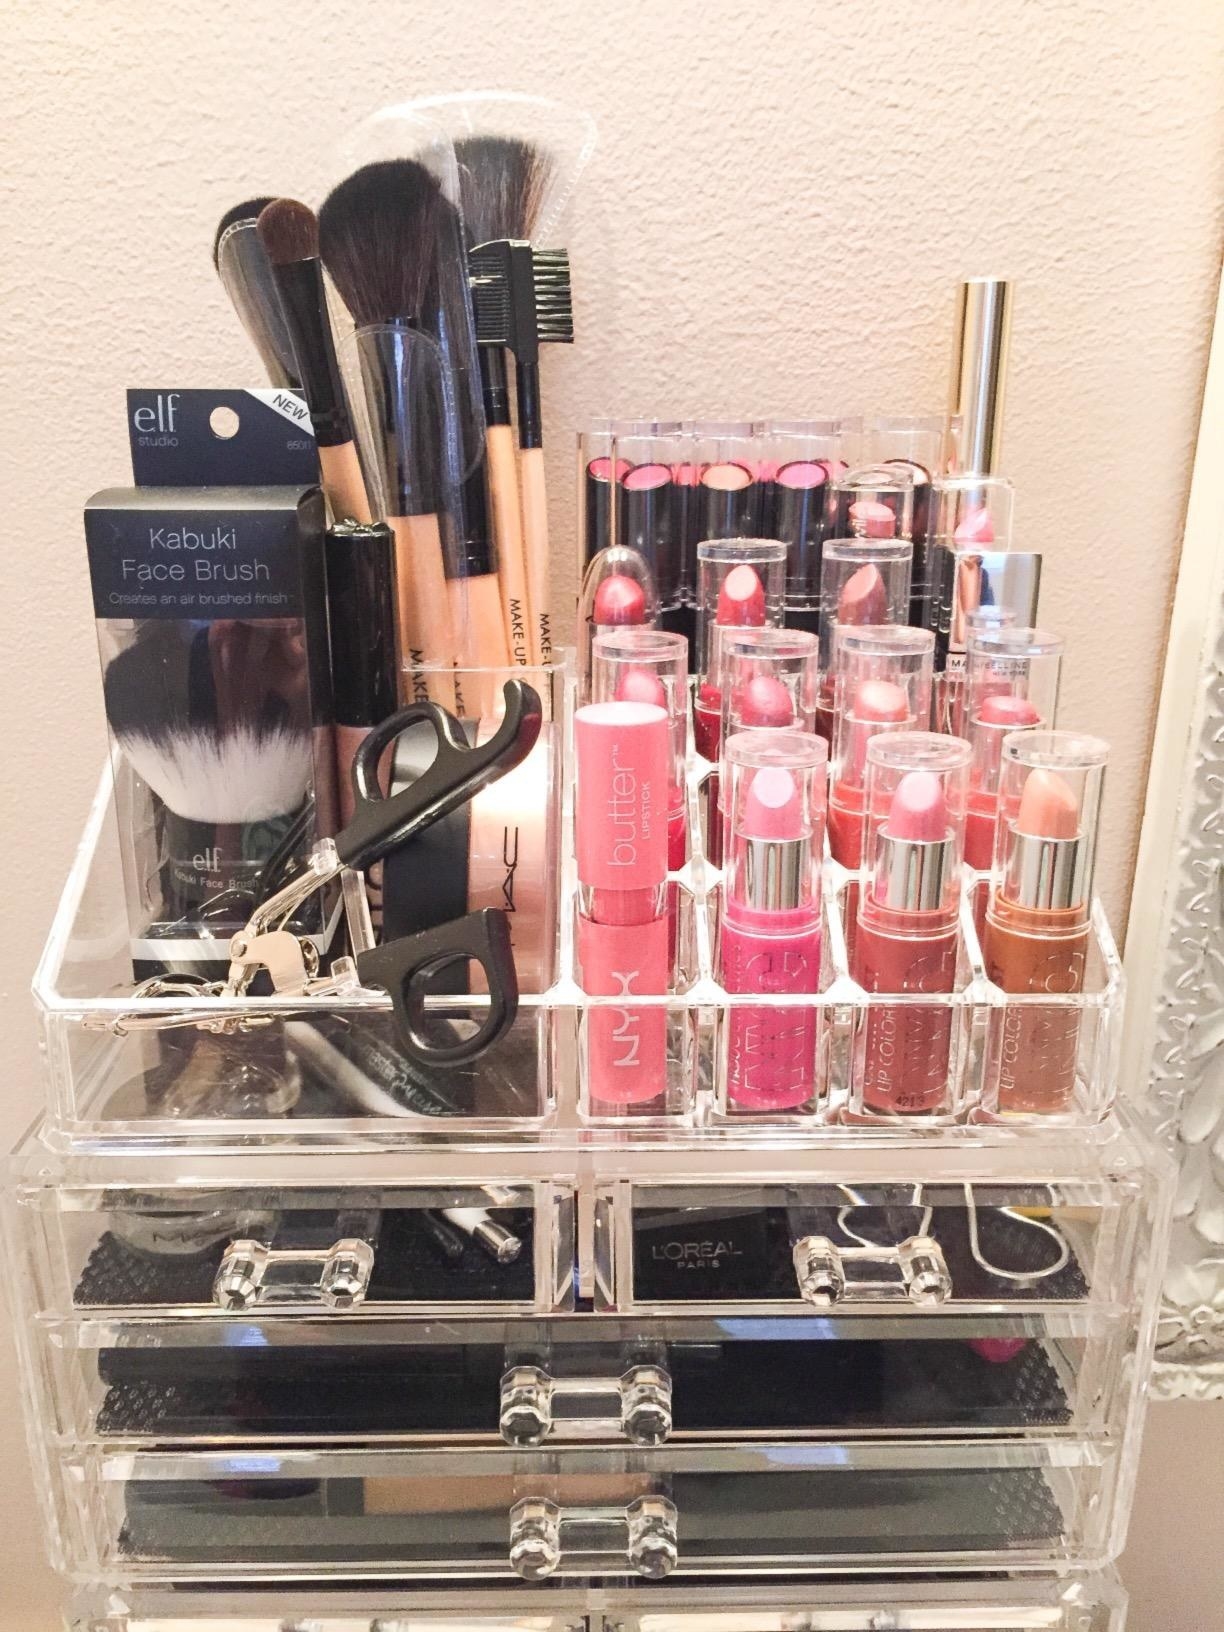 reviewer image of makeup organized in the clear organizer